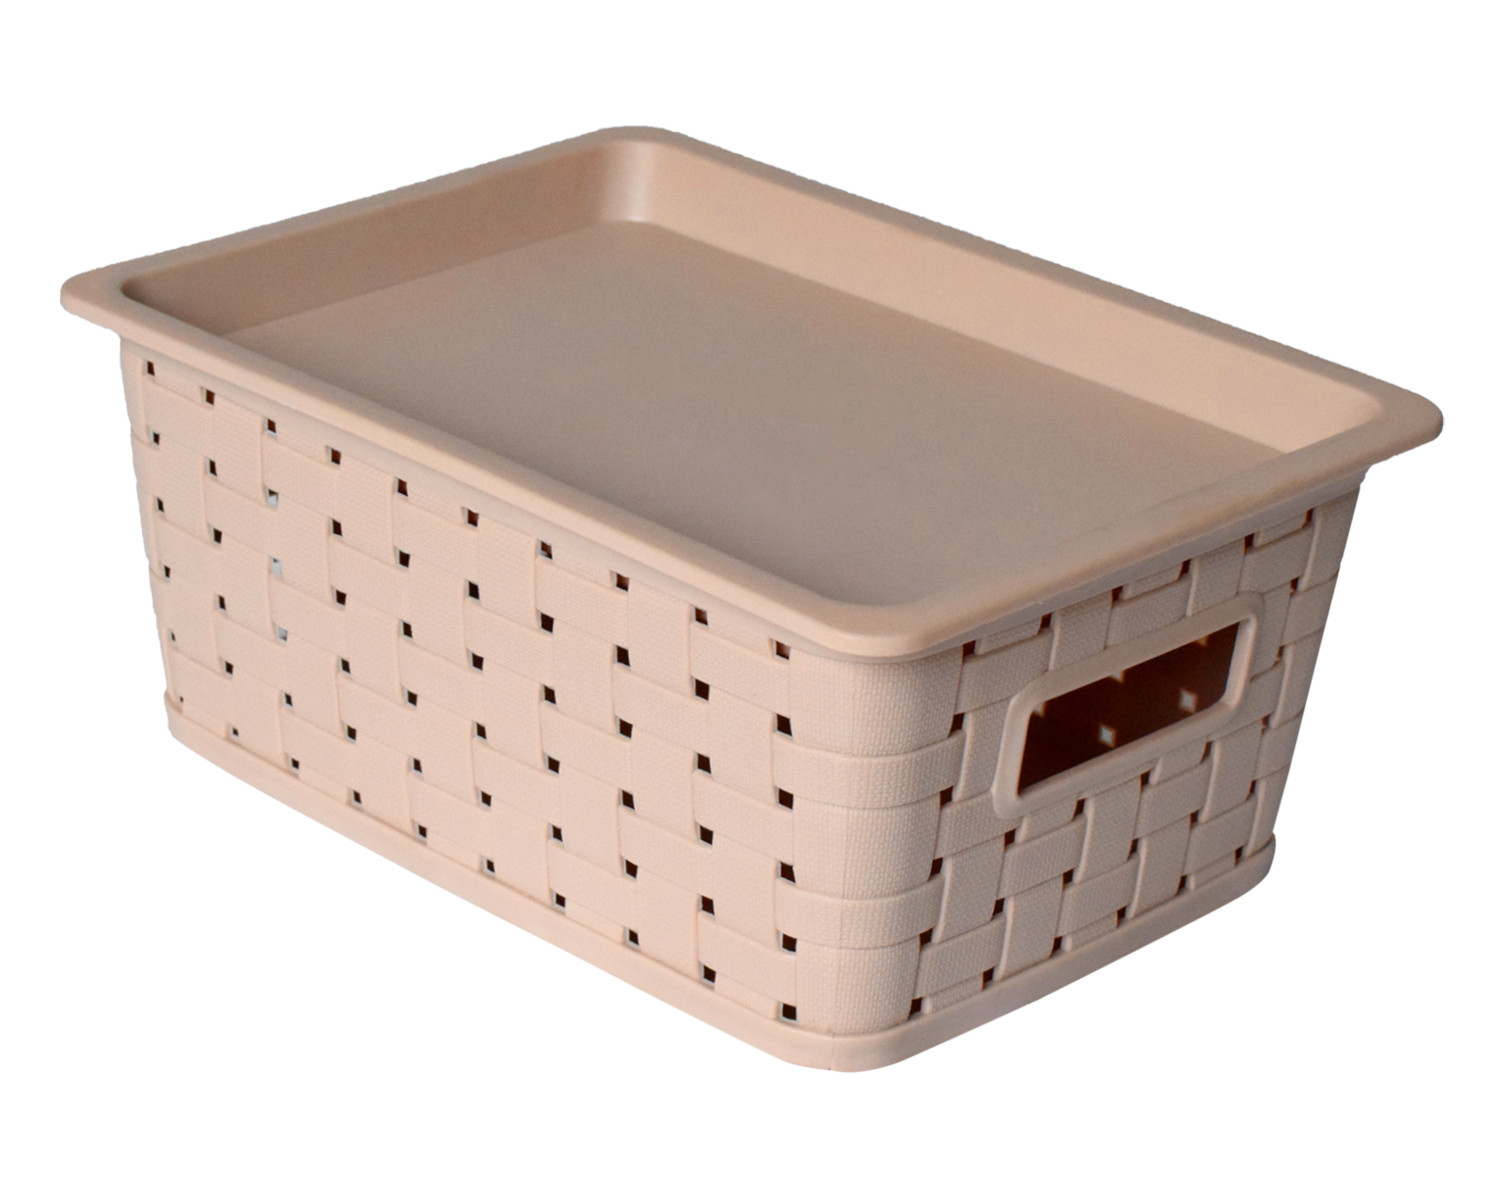 Kuber Industries BPA Free Attractive Design Multipurpose Large Trendy Storage Basket With Lid|Material-Plastic|Color-Light Brown